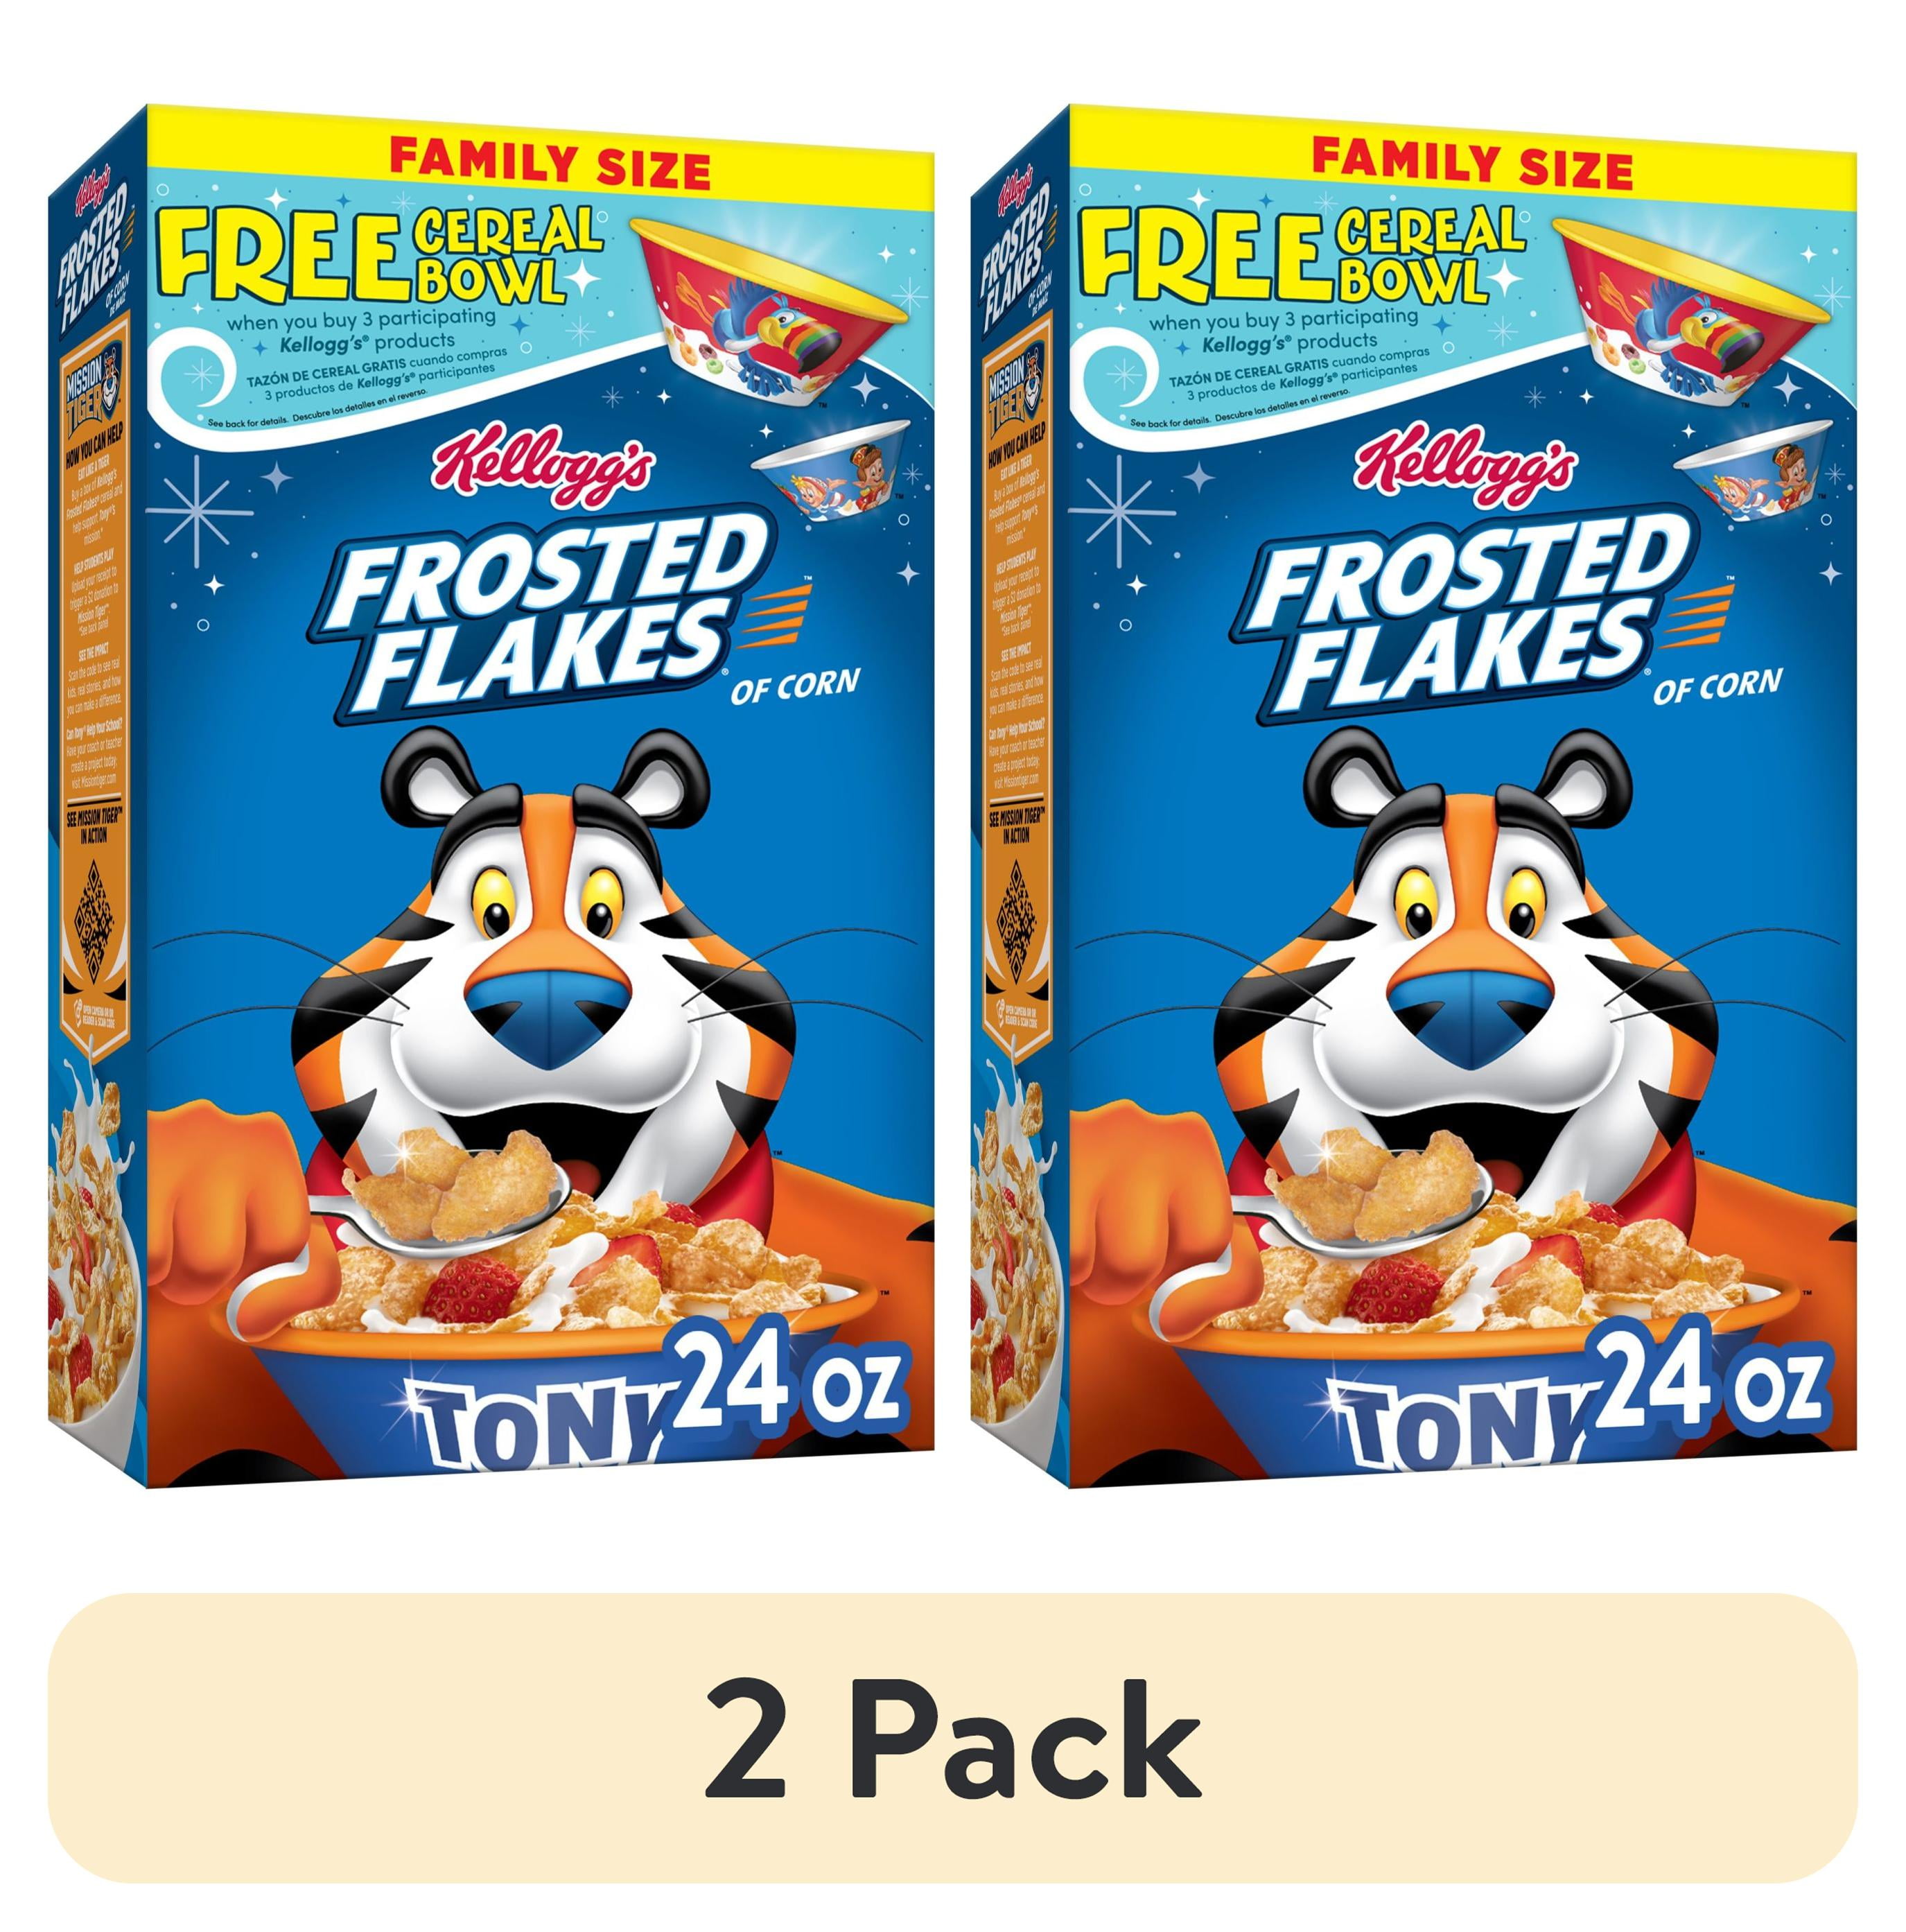 Kellogg's Frosted Flakes Original Breakfast Cereal, Family Size, 24 oz Box